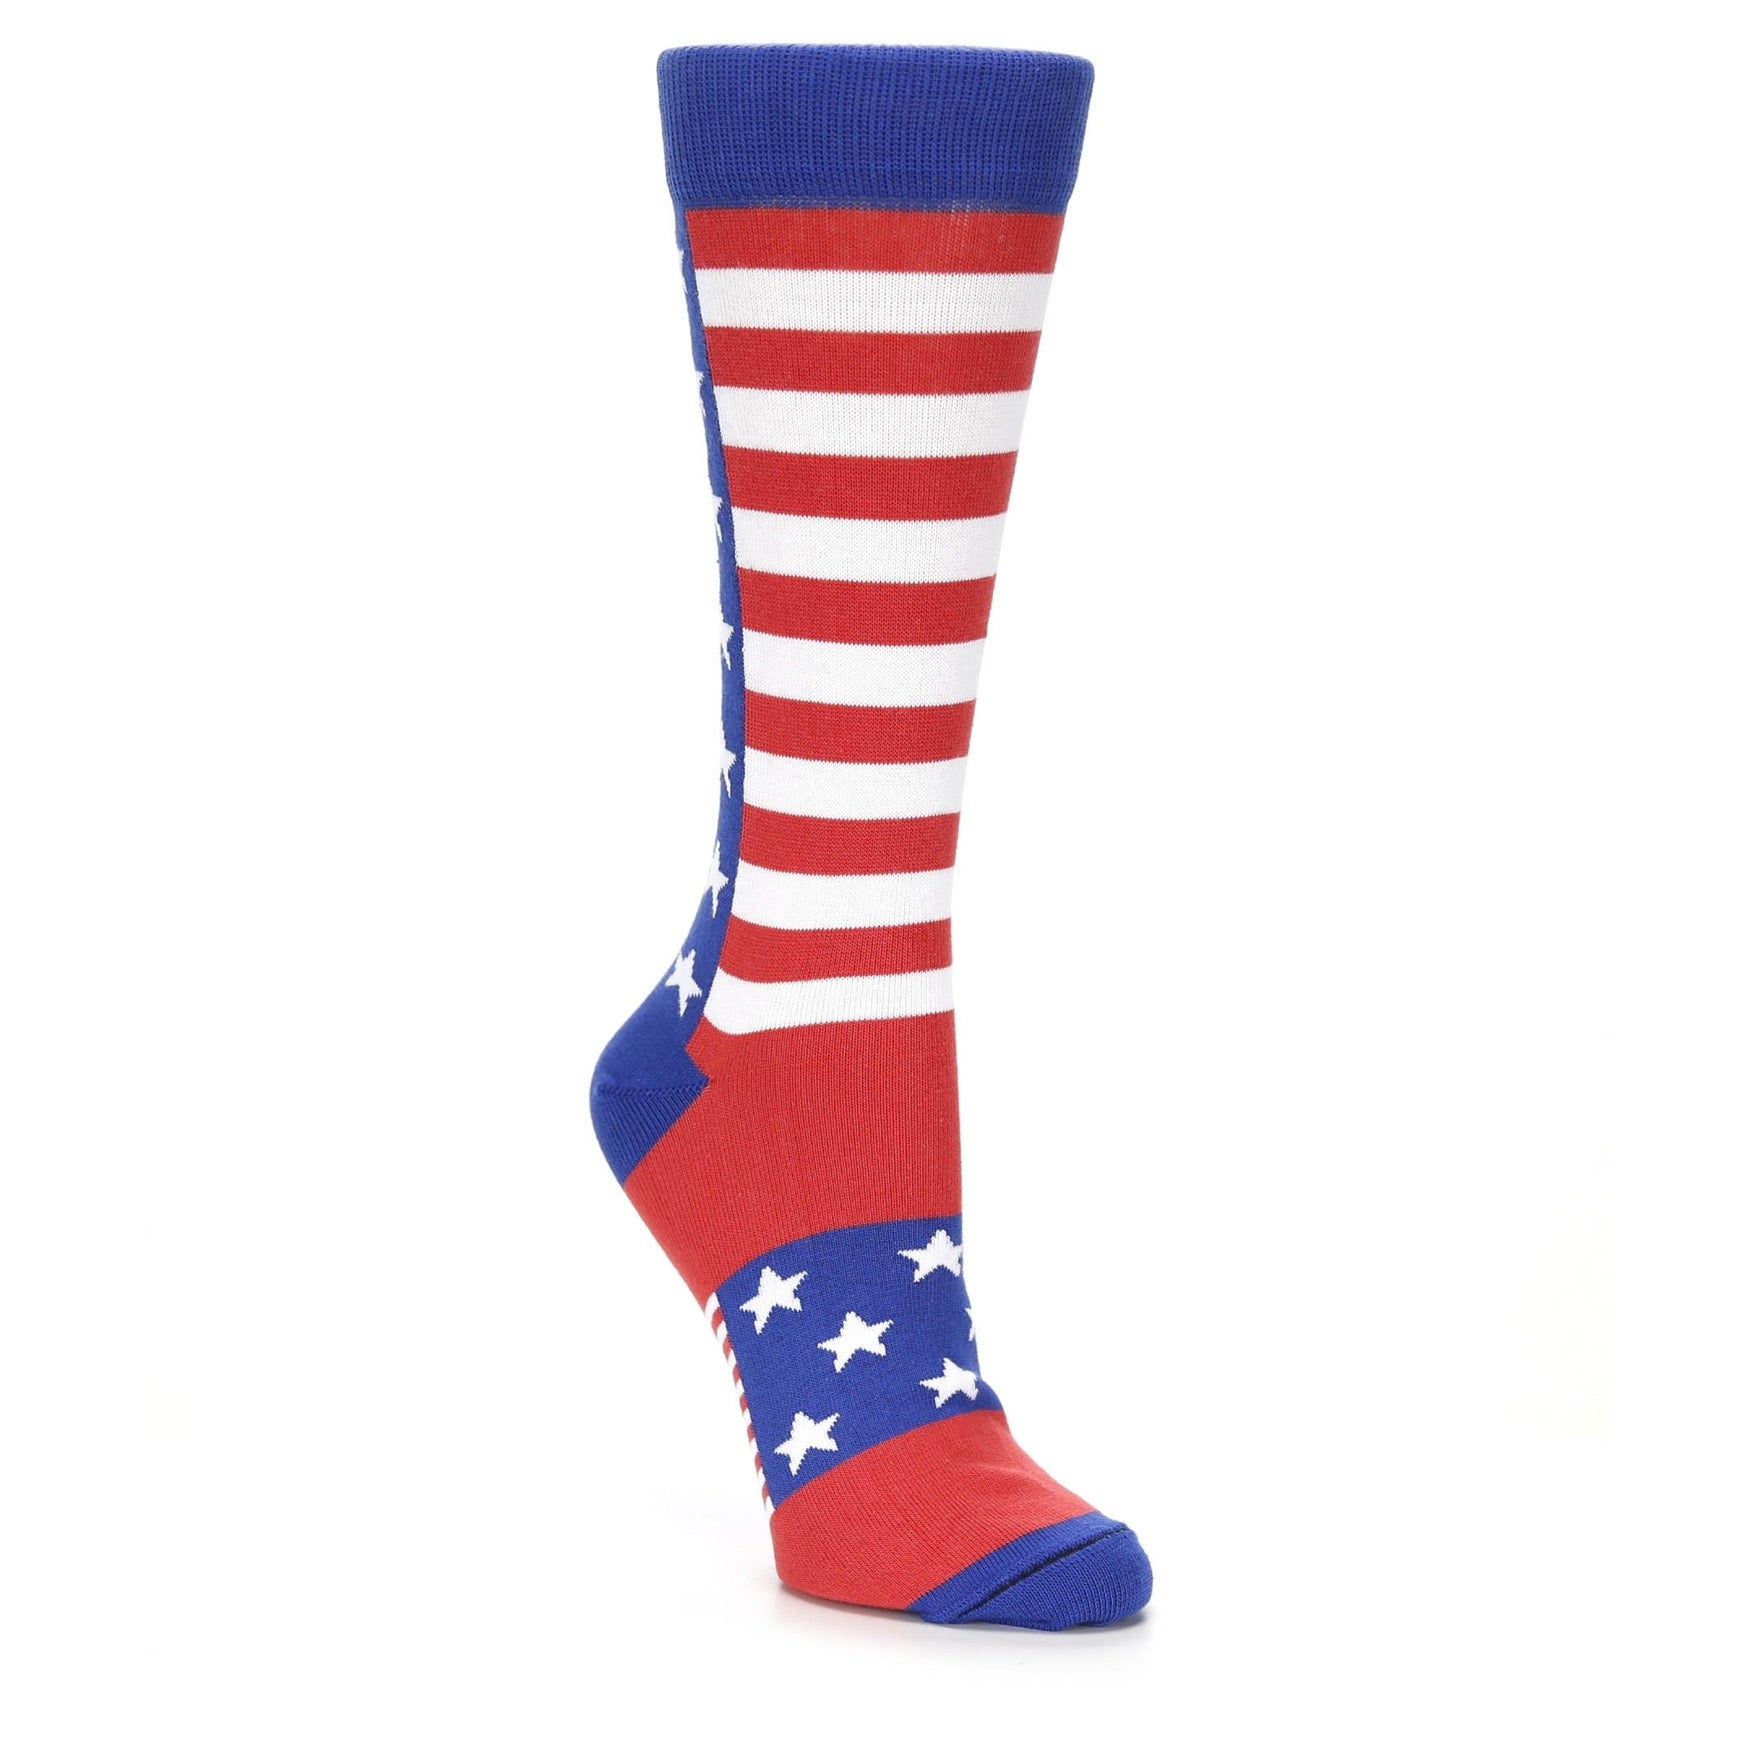 American Flag Socks with Stars and Stripes